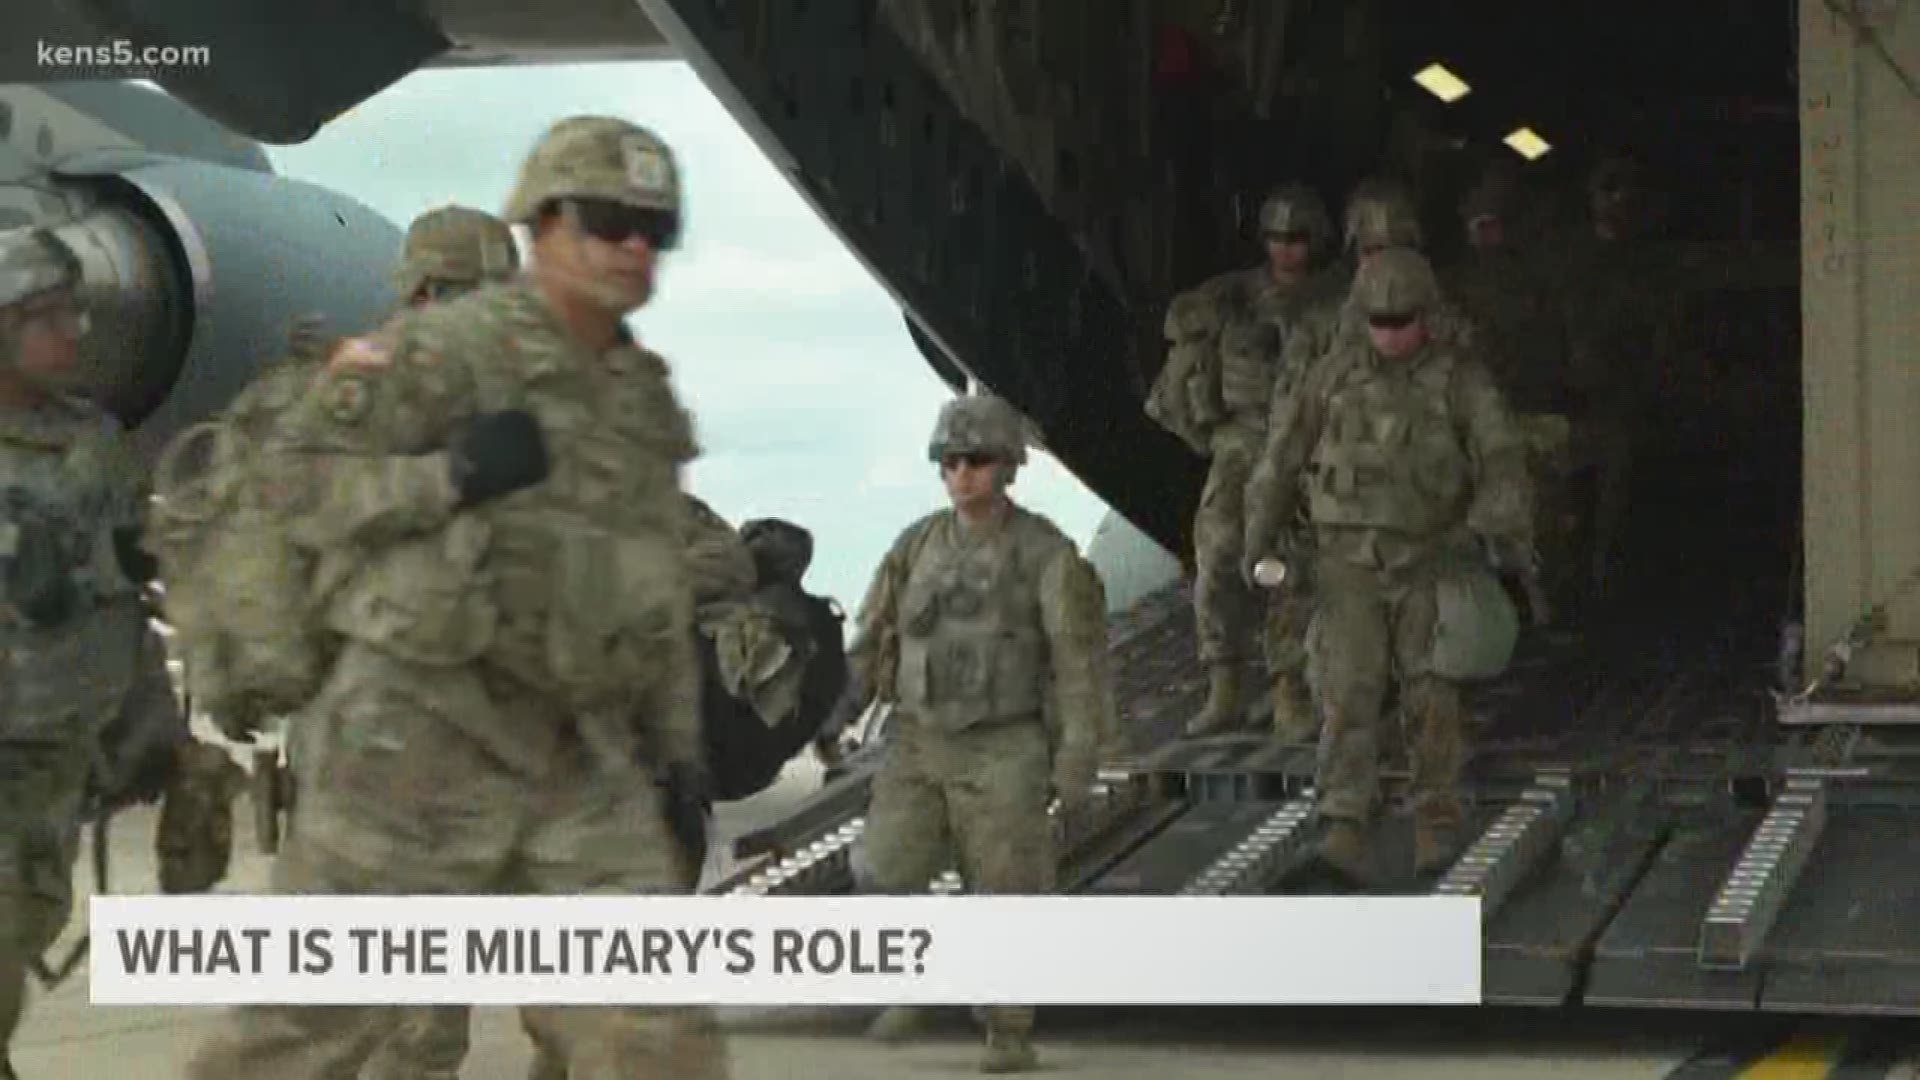 There are a lot of questions about what the military is allowed to do at the border, so we're here to provide those answers.